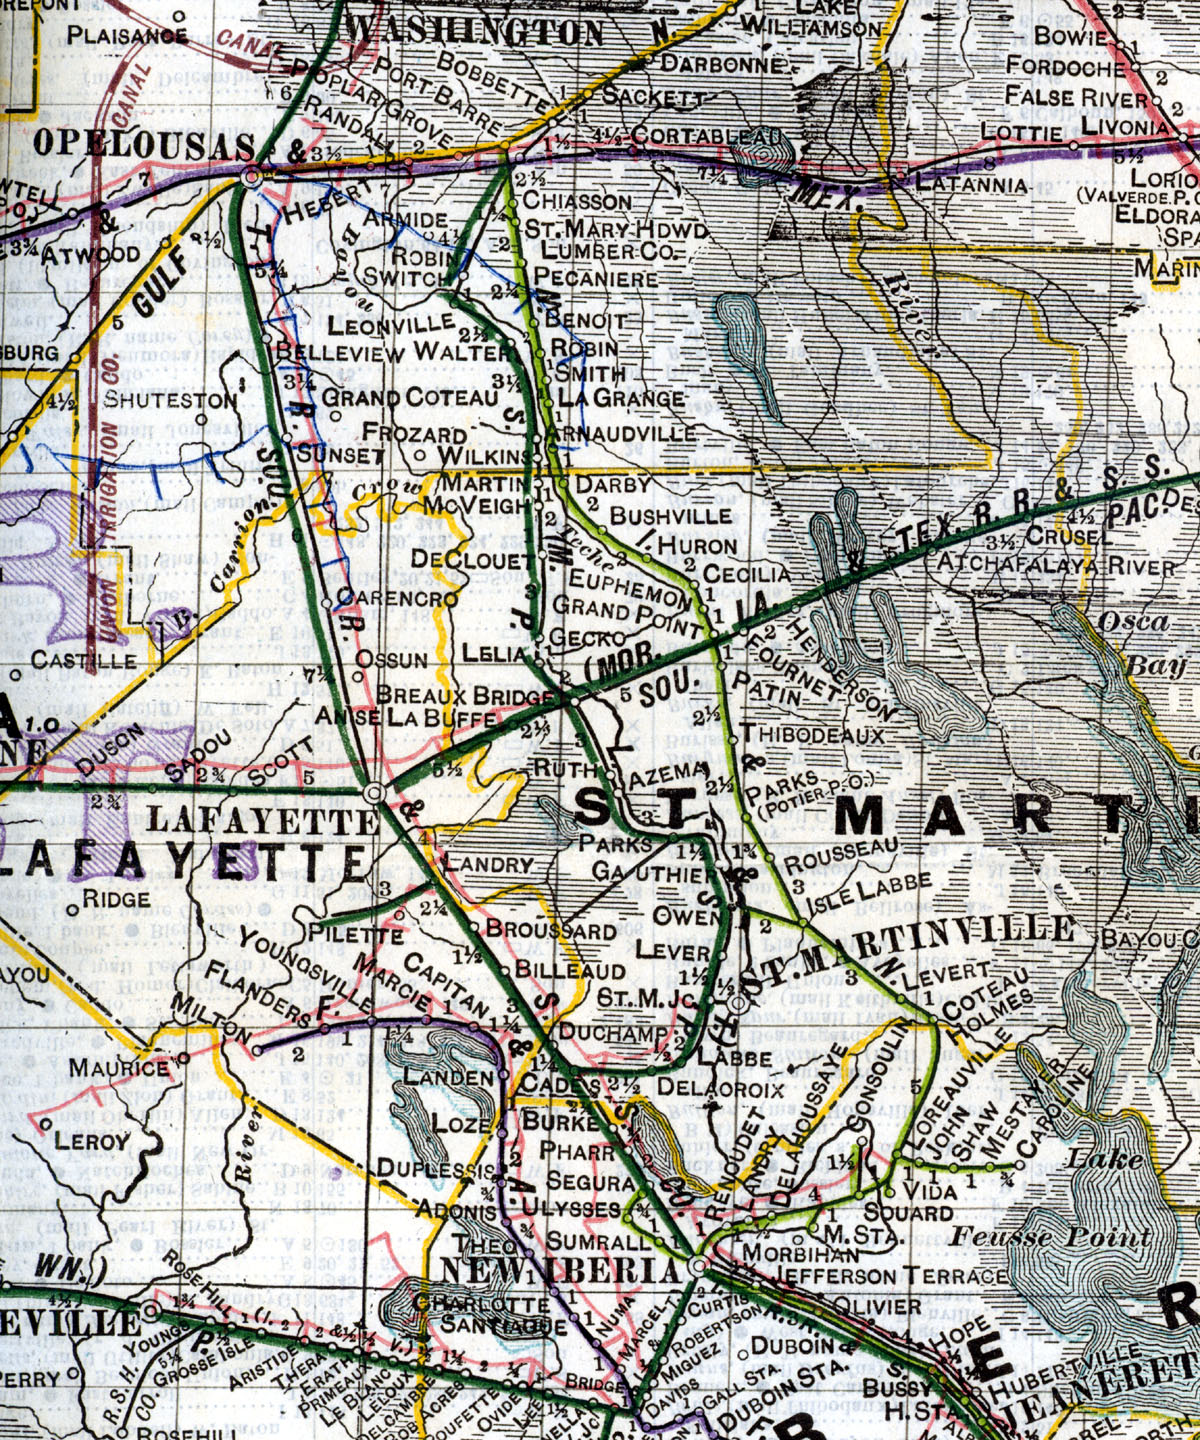 New Iberia & Northern Railroad Company, Map Showing Route in 1914.